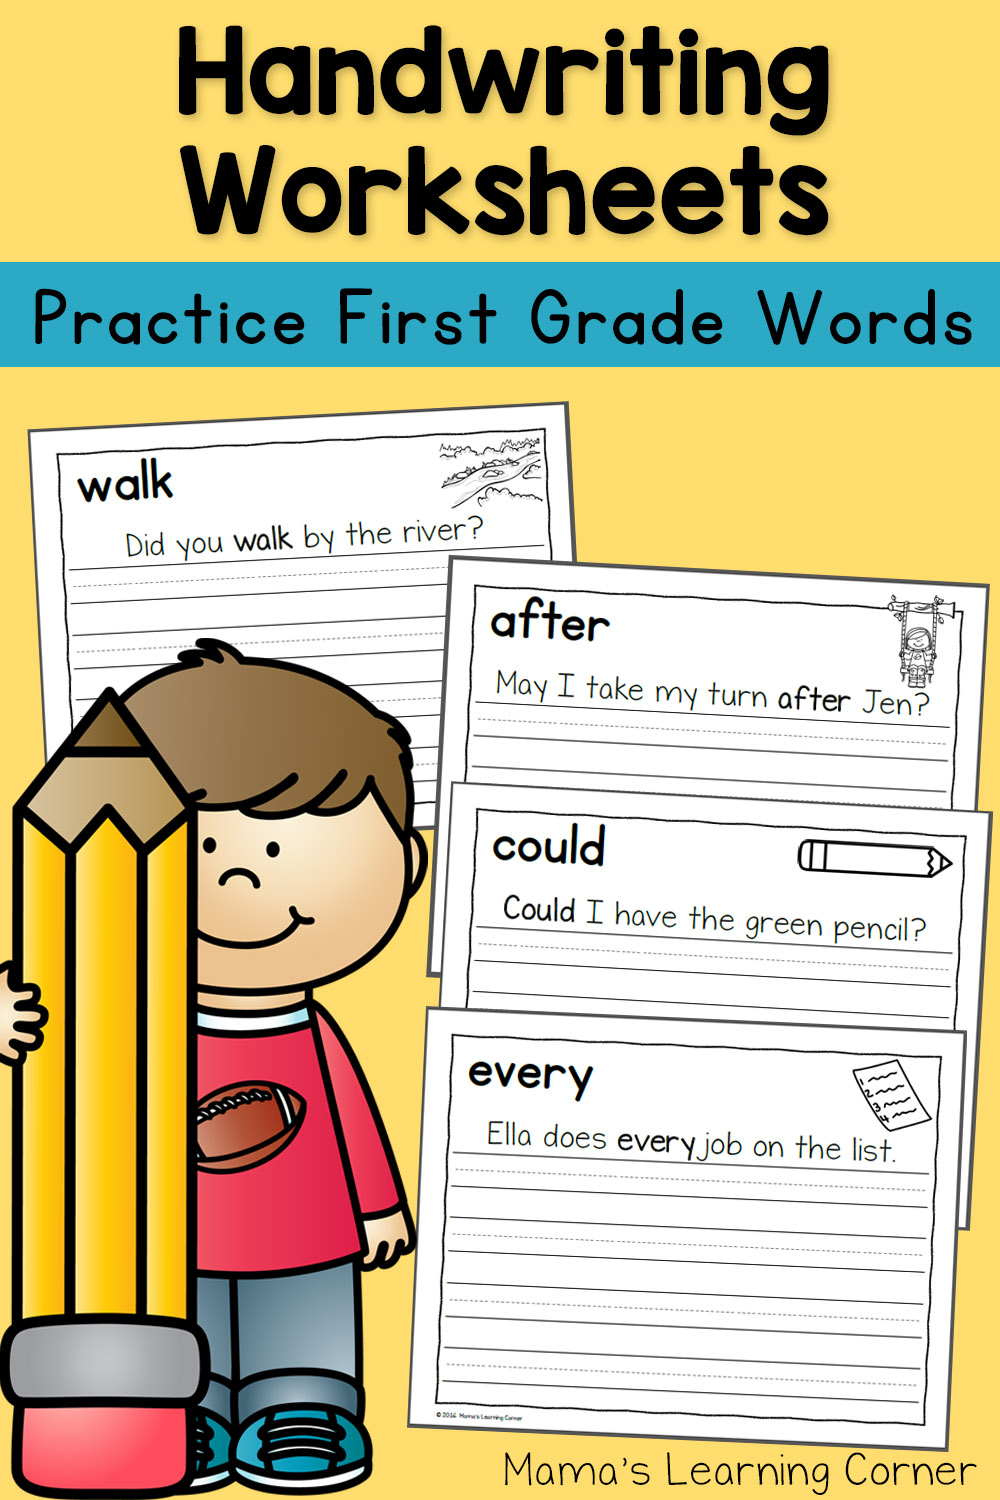 Handwriting Worksheets for Kids: First Grade Sentences - includes 4 free sample pages!